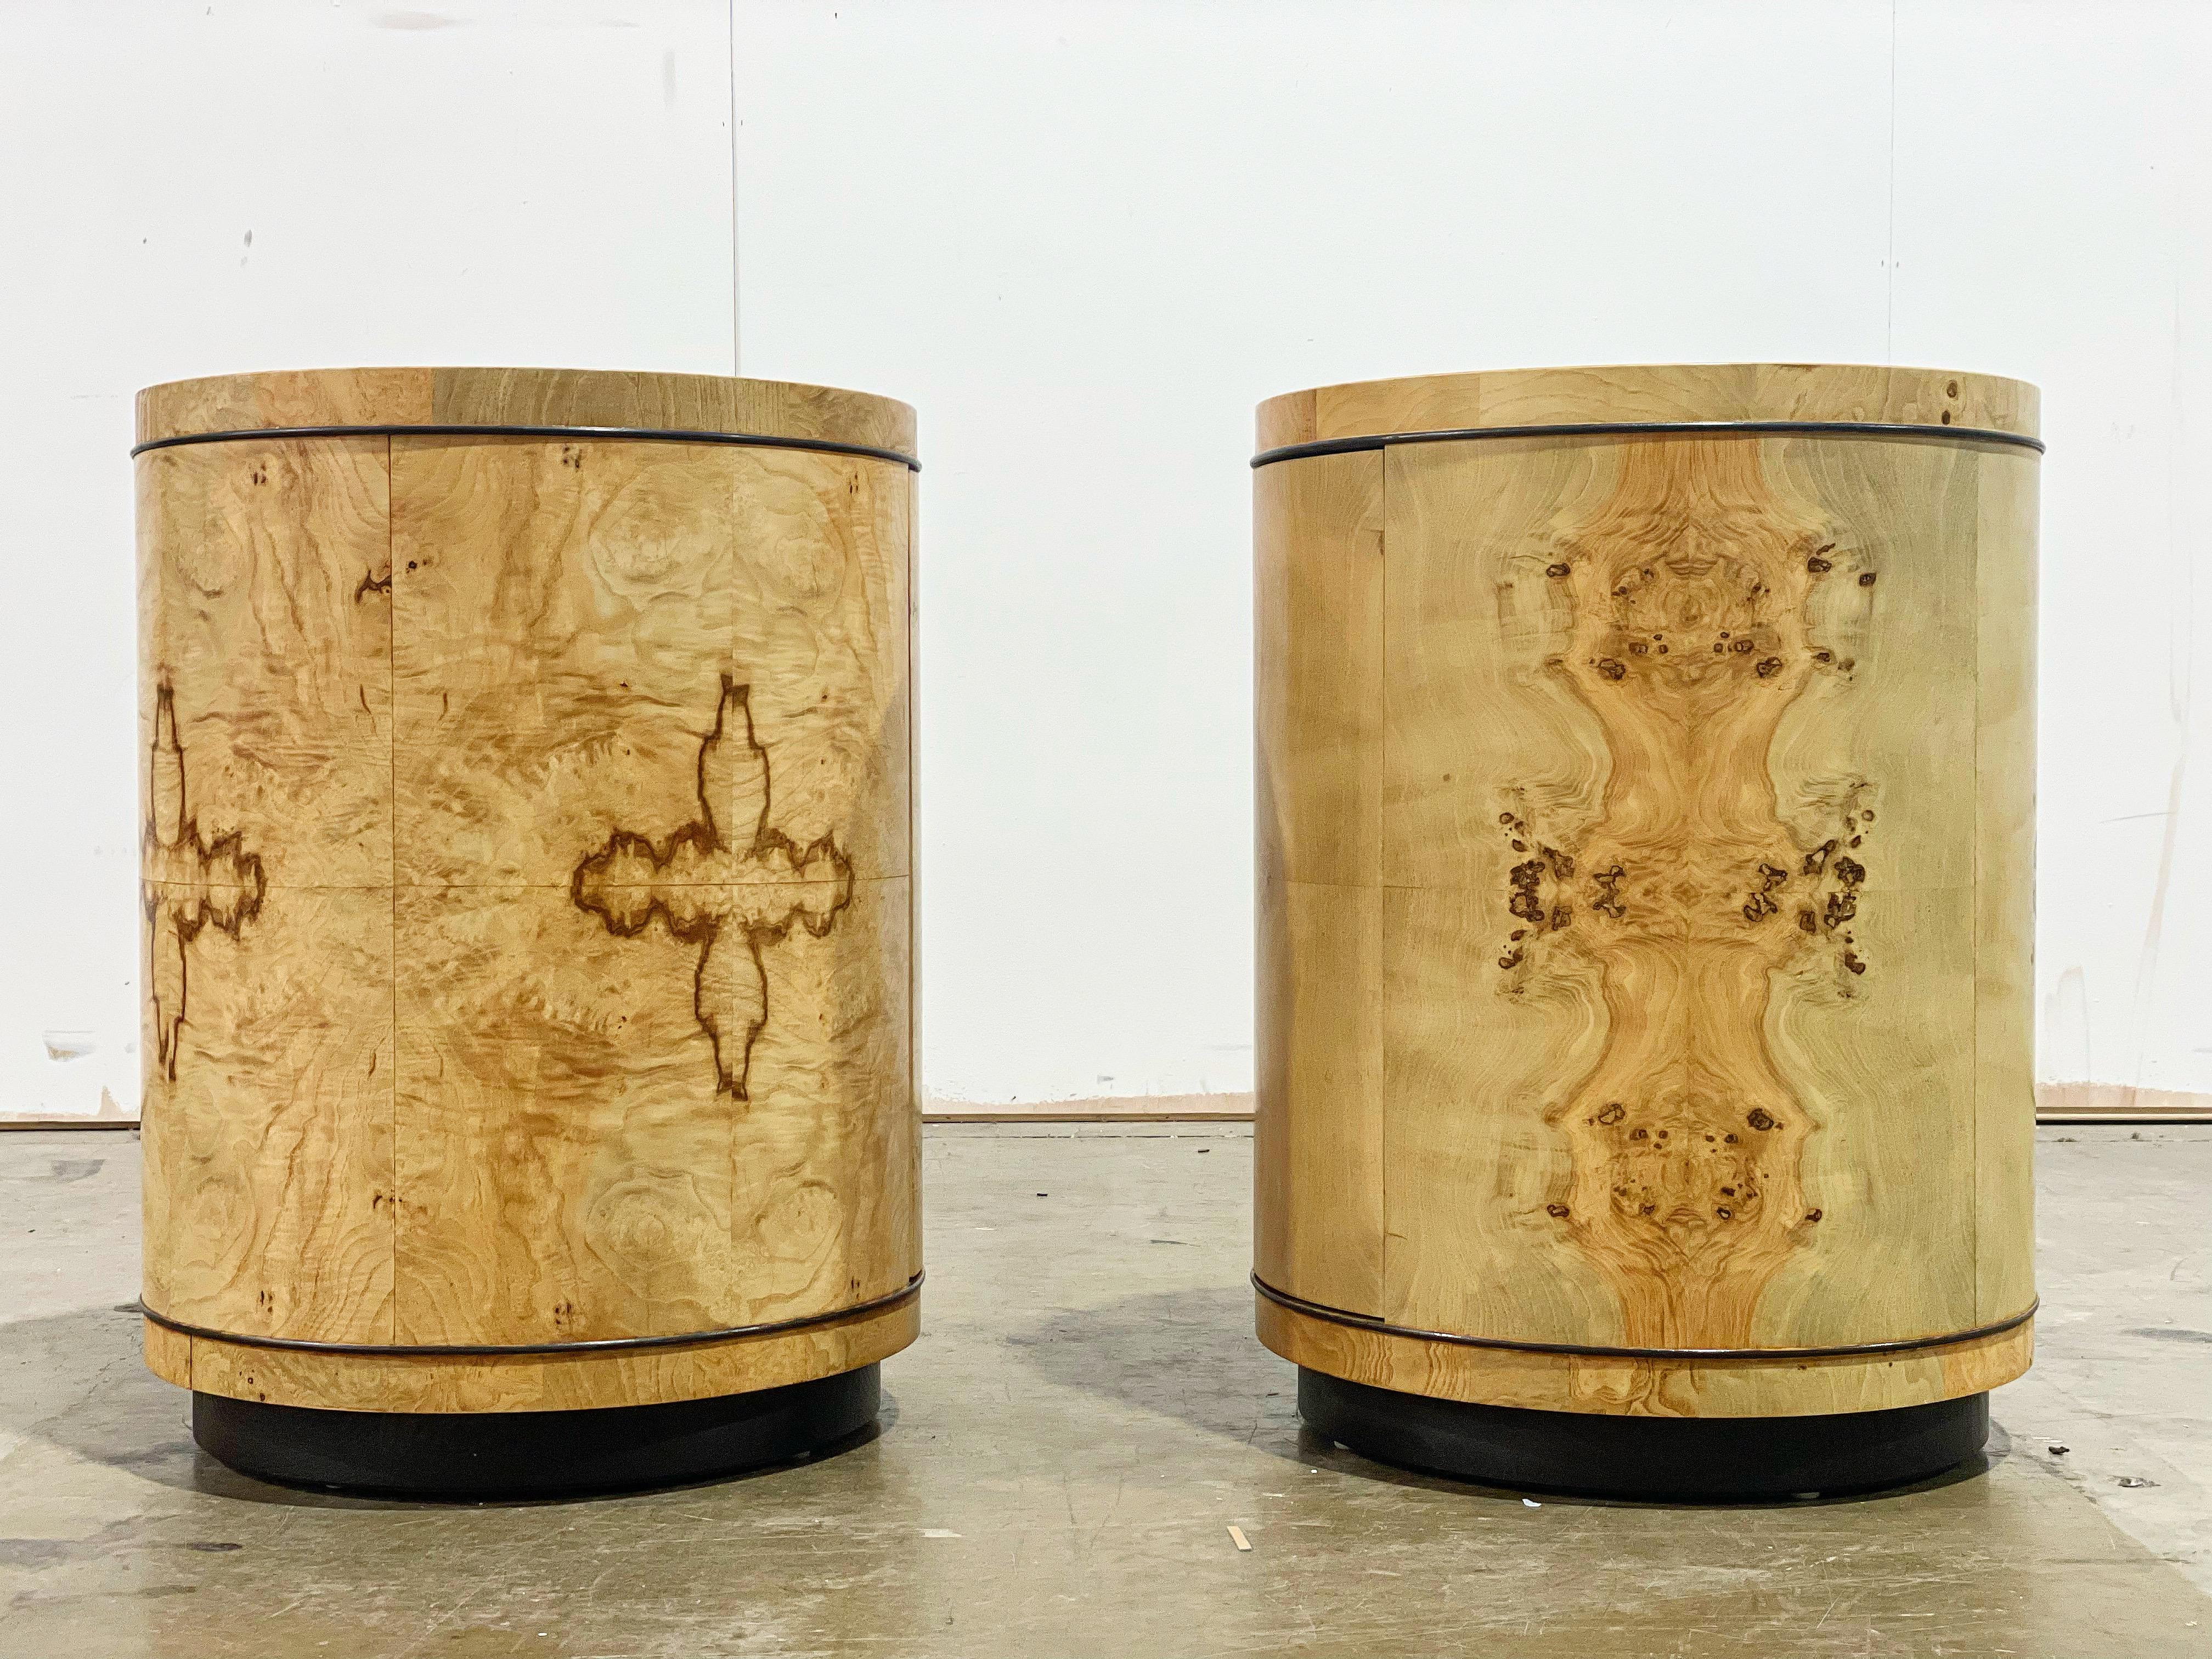 Exquisite pair of round drum tables in book matched burled olivewood with ebony trim detail and solid ash cabinets. A subtle design that commands attention. Produced circa 1980 by Henredon for their famed Scene Two line.
These look to have been